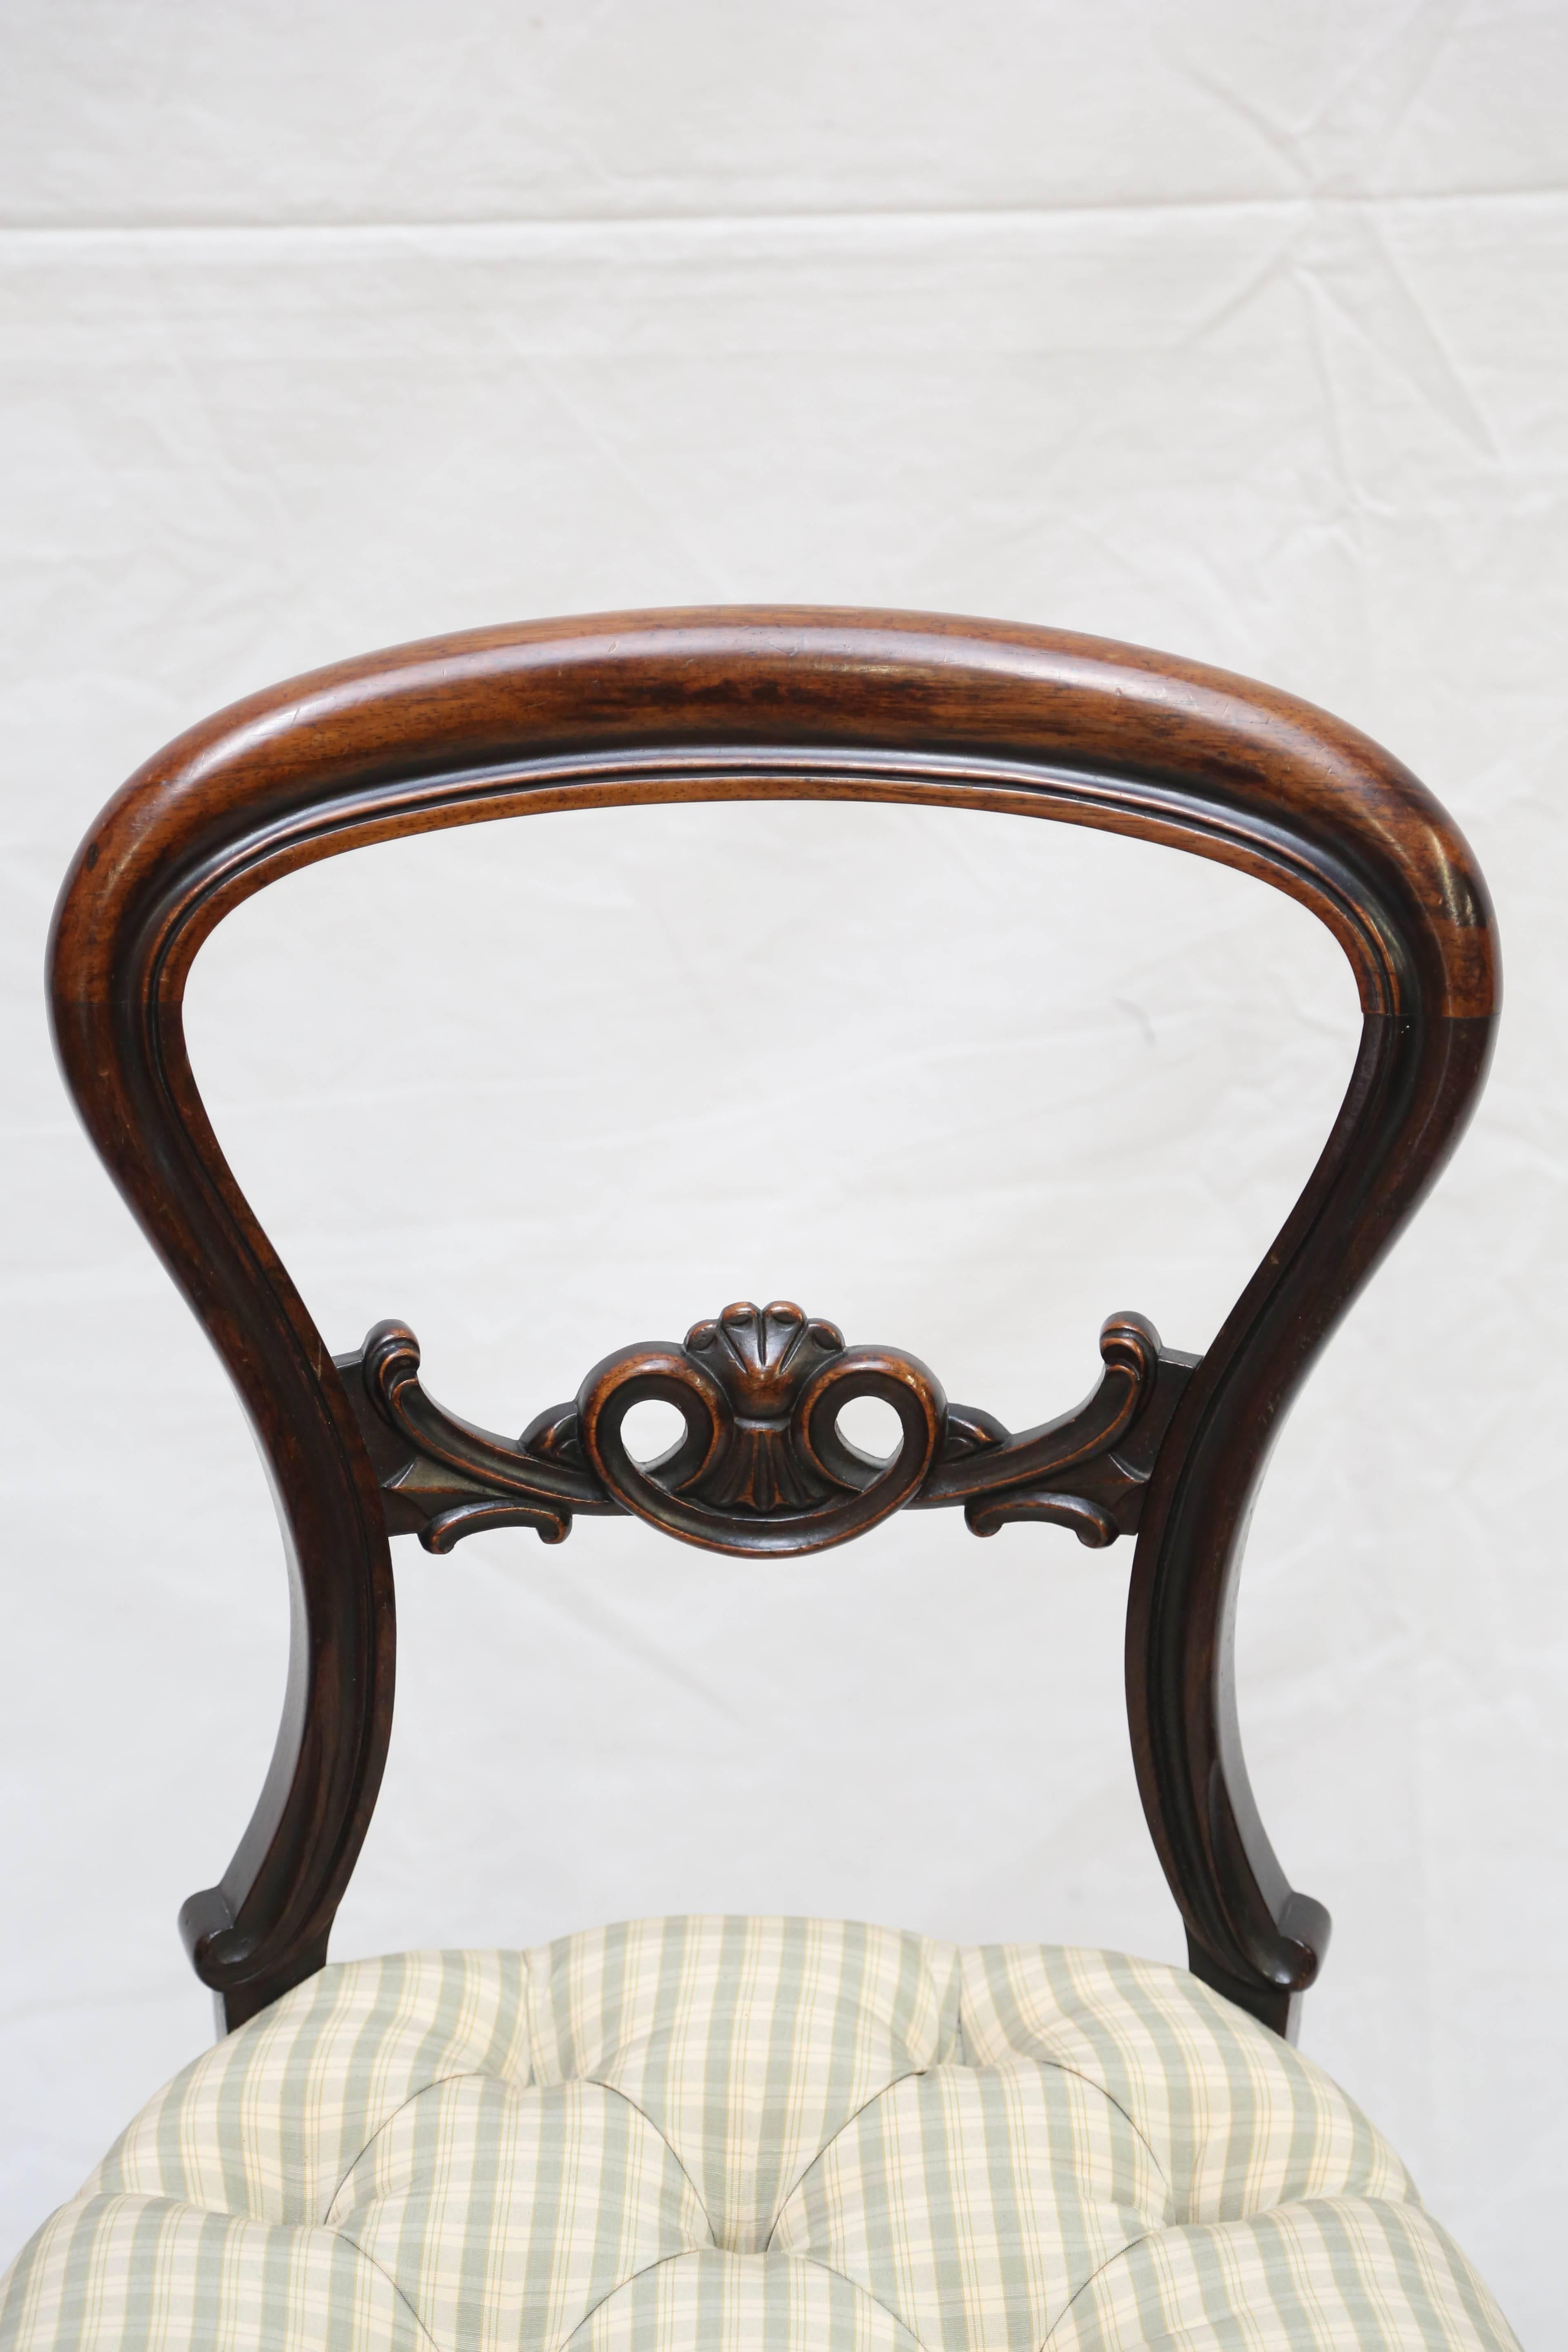 The circular open back joined by a foliate clasp; the tufted seat on cabriole legs.